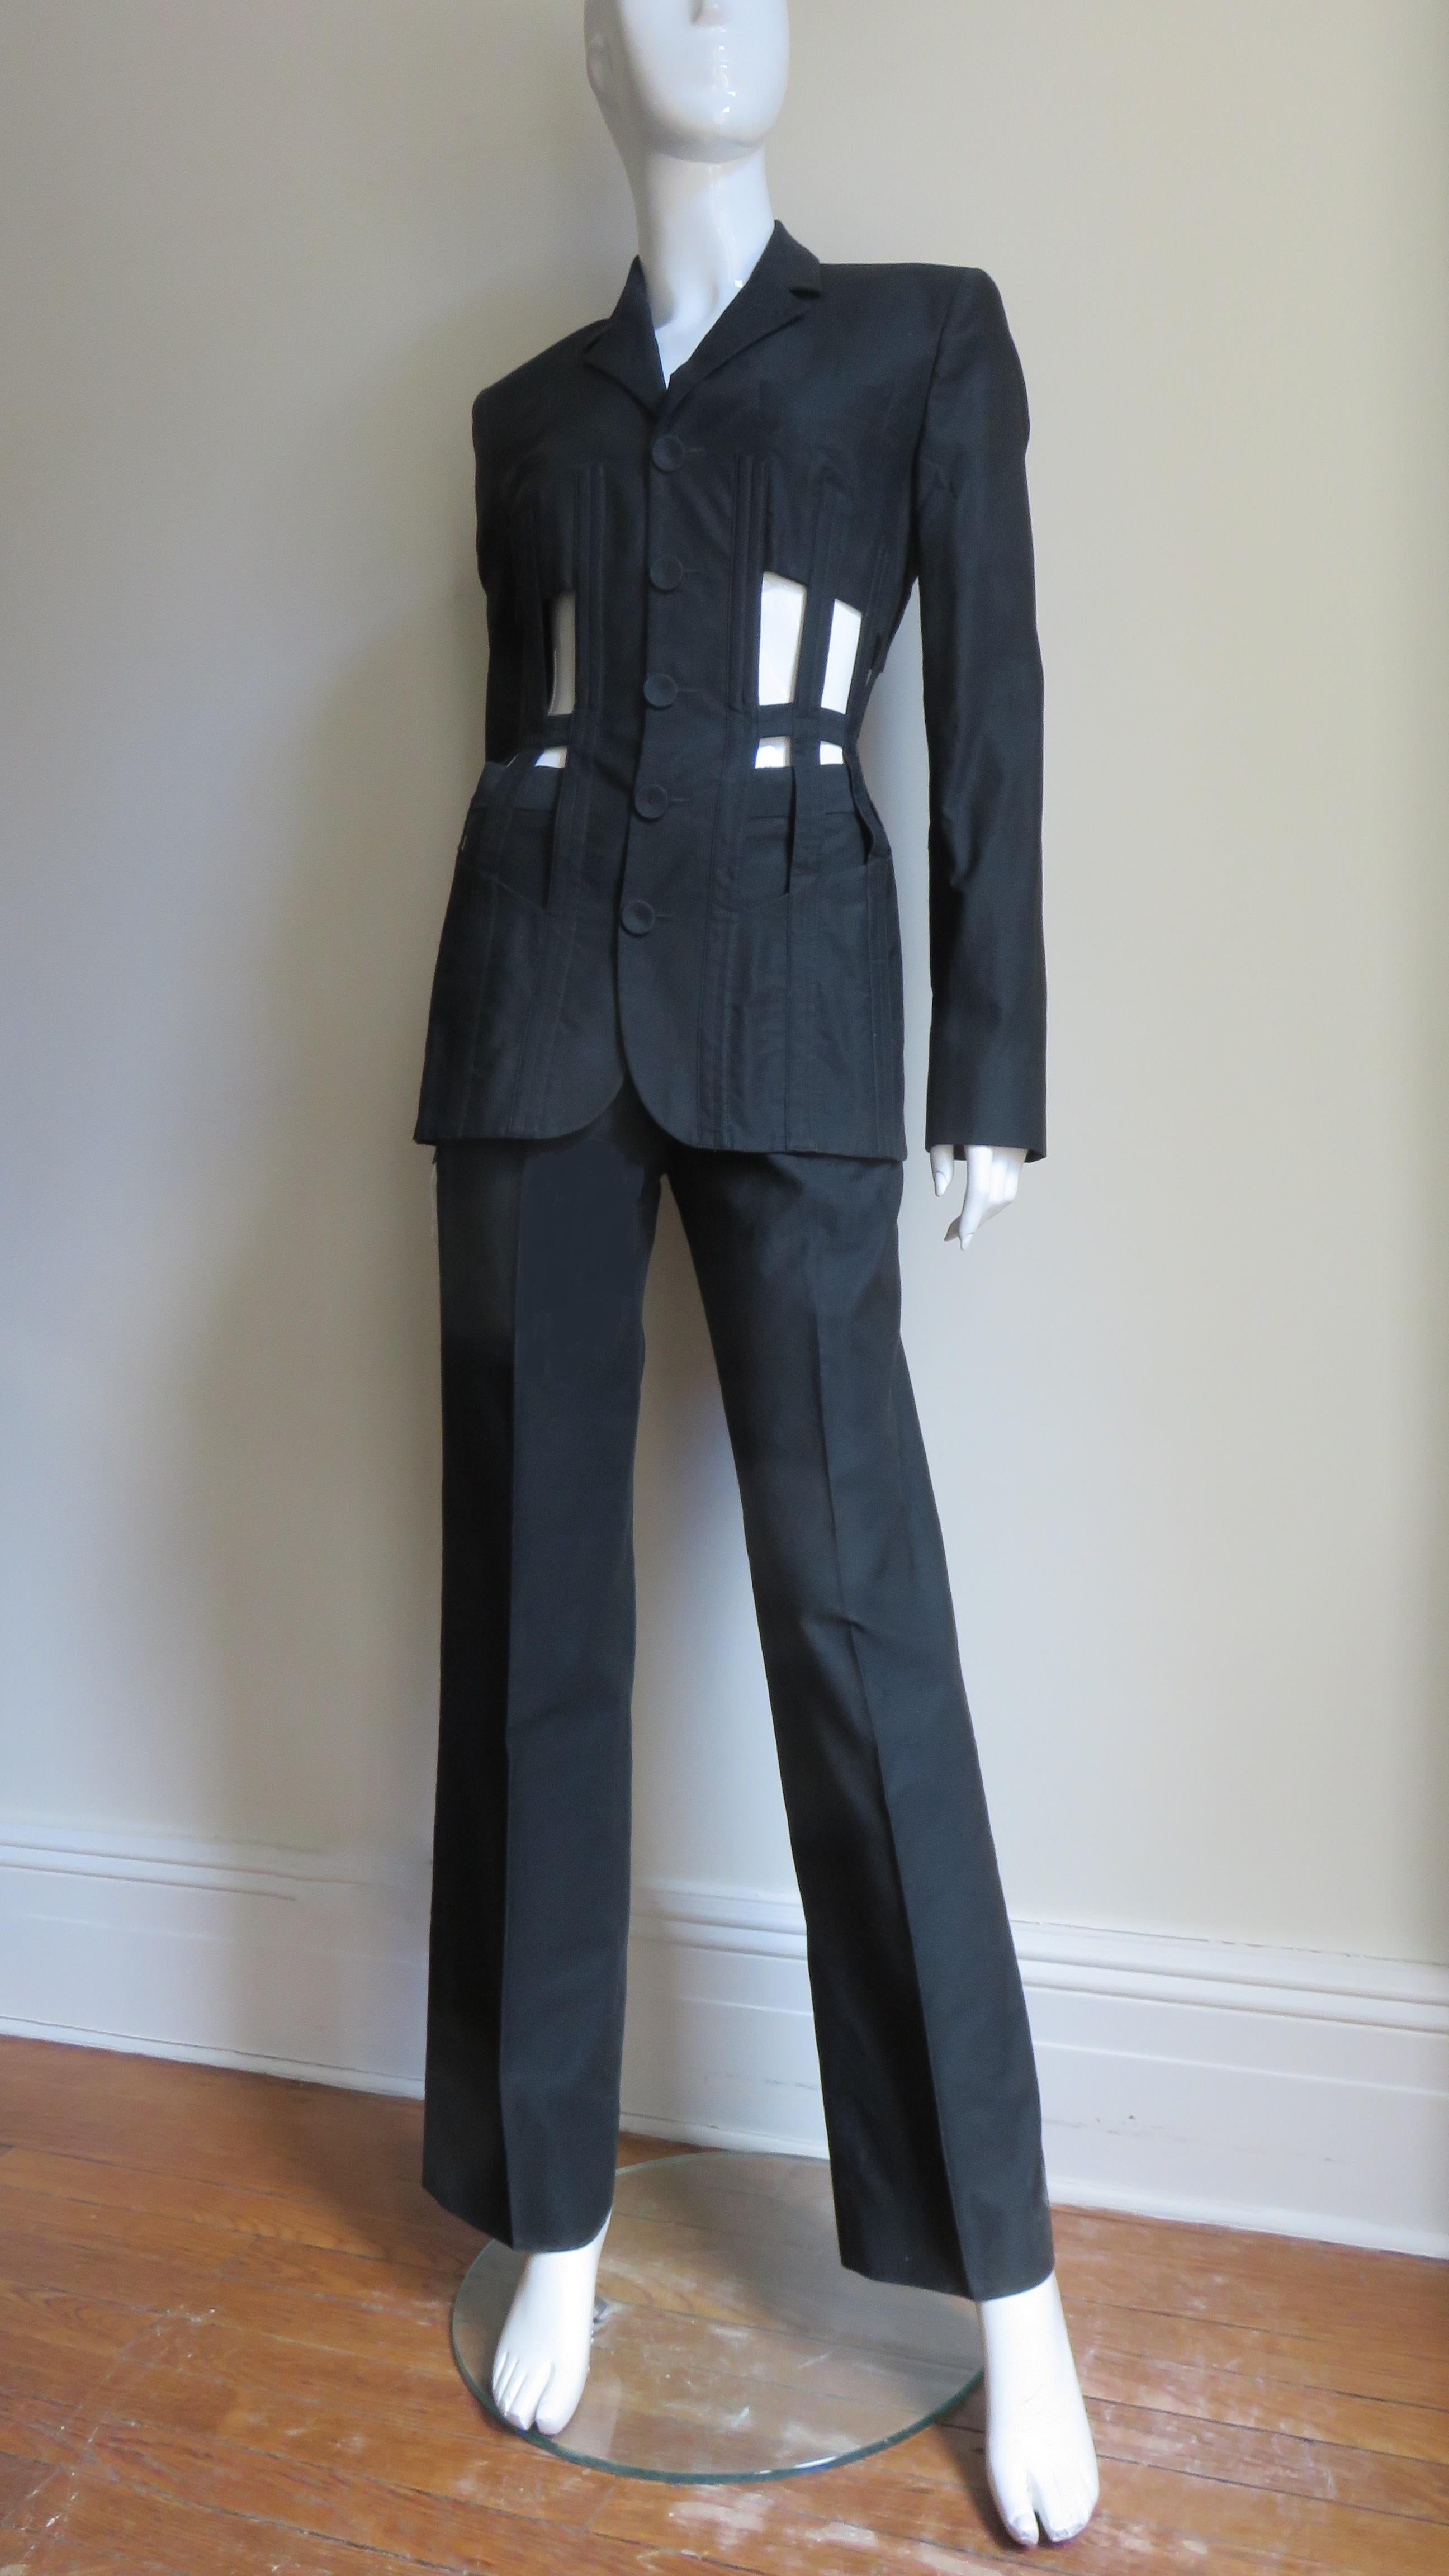 A fabulous iconic black polished cotton lace-up back cage jacket and pants suit from Jean Paul Gaultier Spring/Summer 1989 Collection.  The jacket has incredible vertical boning alternating with cut outs from under bust to hips around the jacket's